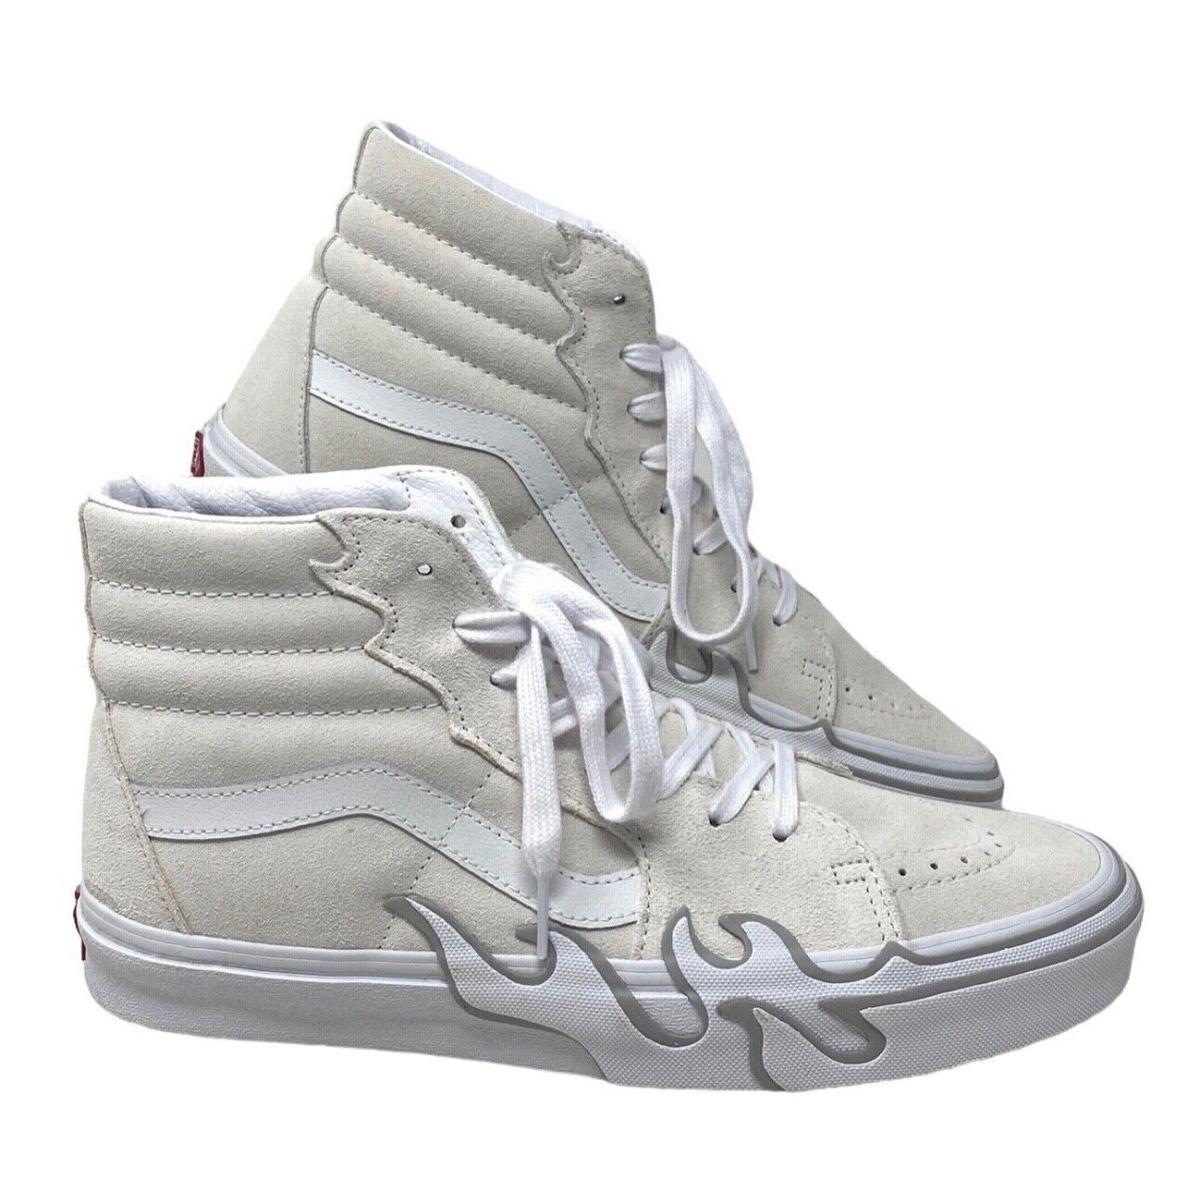 Vans Sk8-Hi Flame Suede White Gray Shoes Skate Sneakers Women`s Size VN0005UJWWW